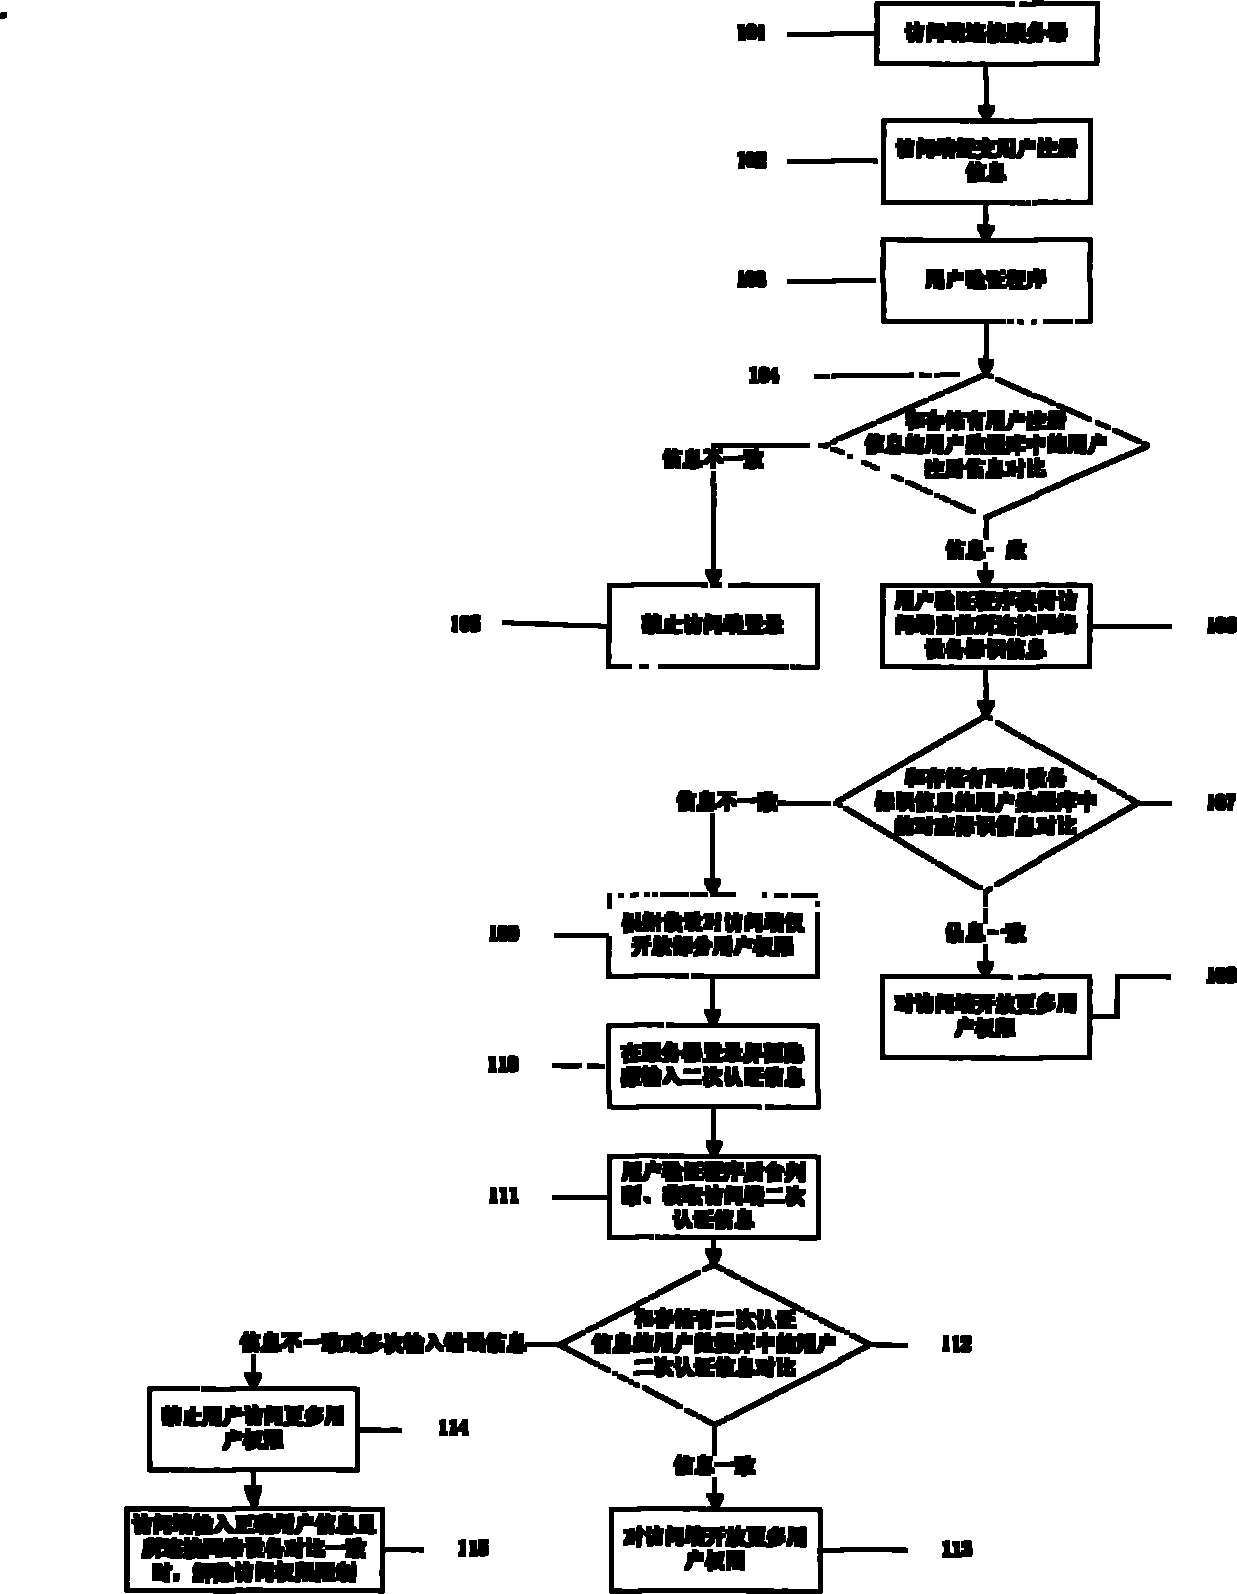 Network user identifying method and system